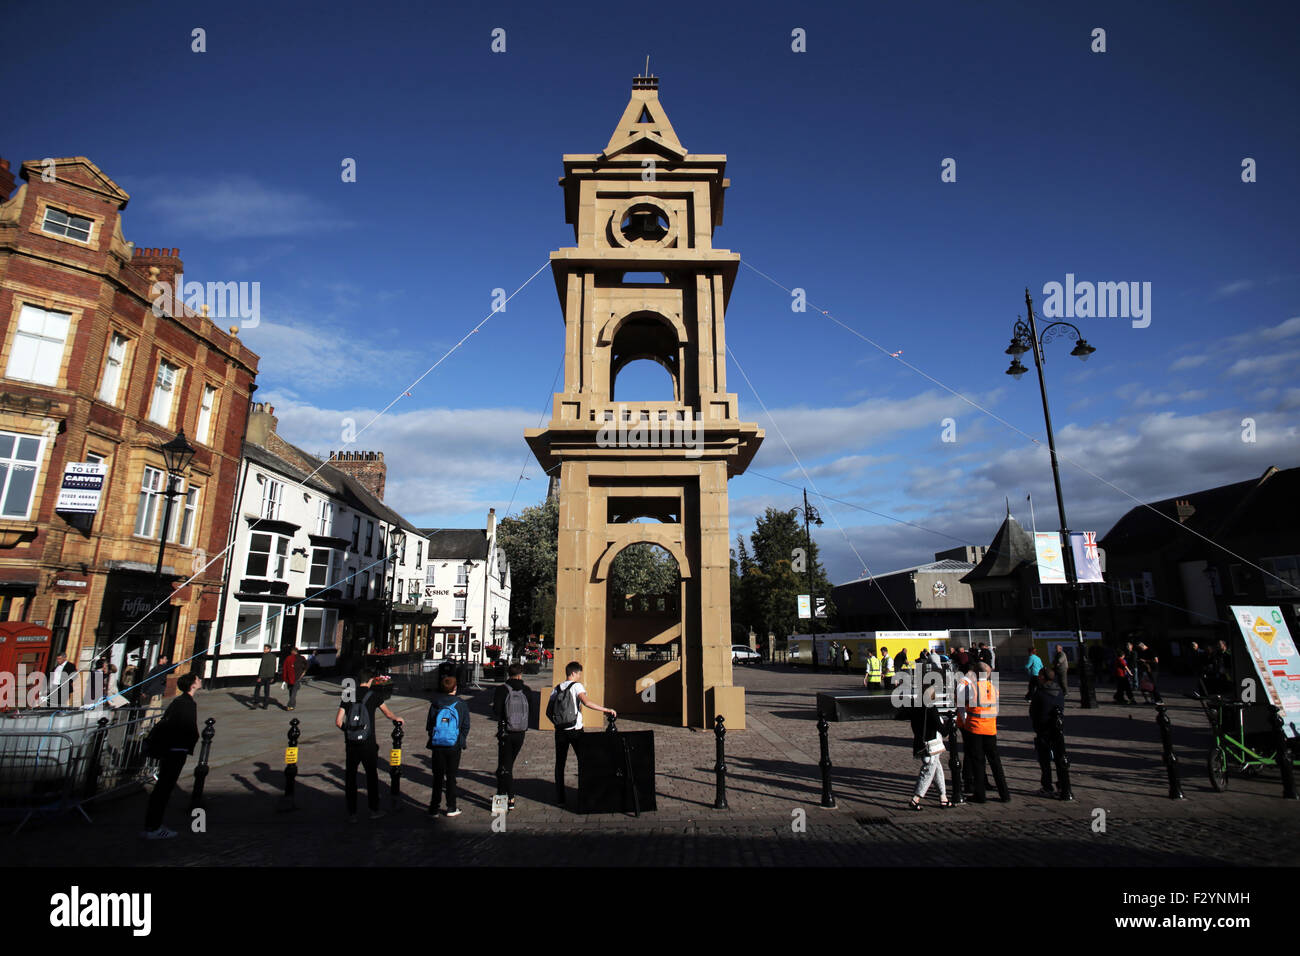 Darlington, UK. 25th Sep, 2015. A 26 metre high tower made entirely from cardboard boxes by the French artist Olivier Grossetete in the town of Darlington in North East England. The tower, a replica of the towns train station tower, was created to mark the opening of the annuall Festival of Thrift. Credit:  Stuart Boulton/Alamy Live News Stock Photo